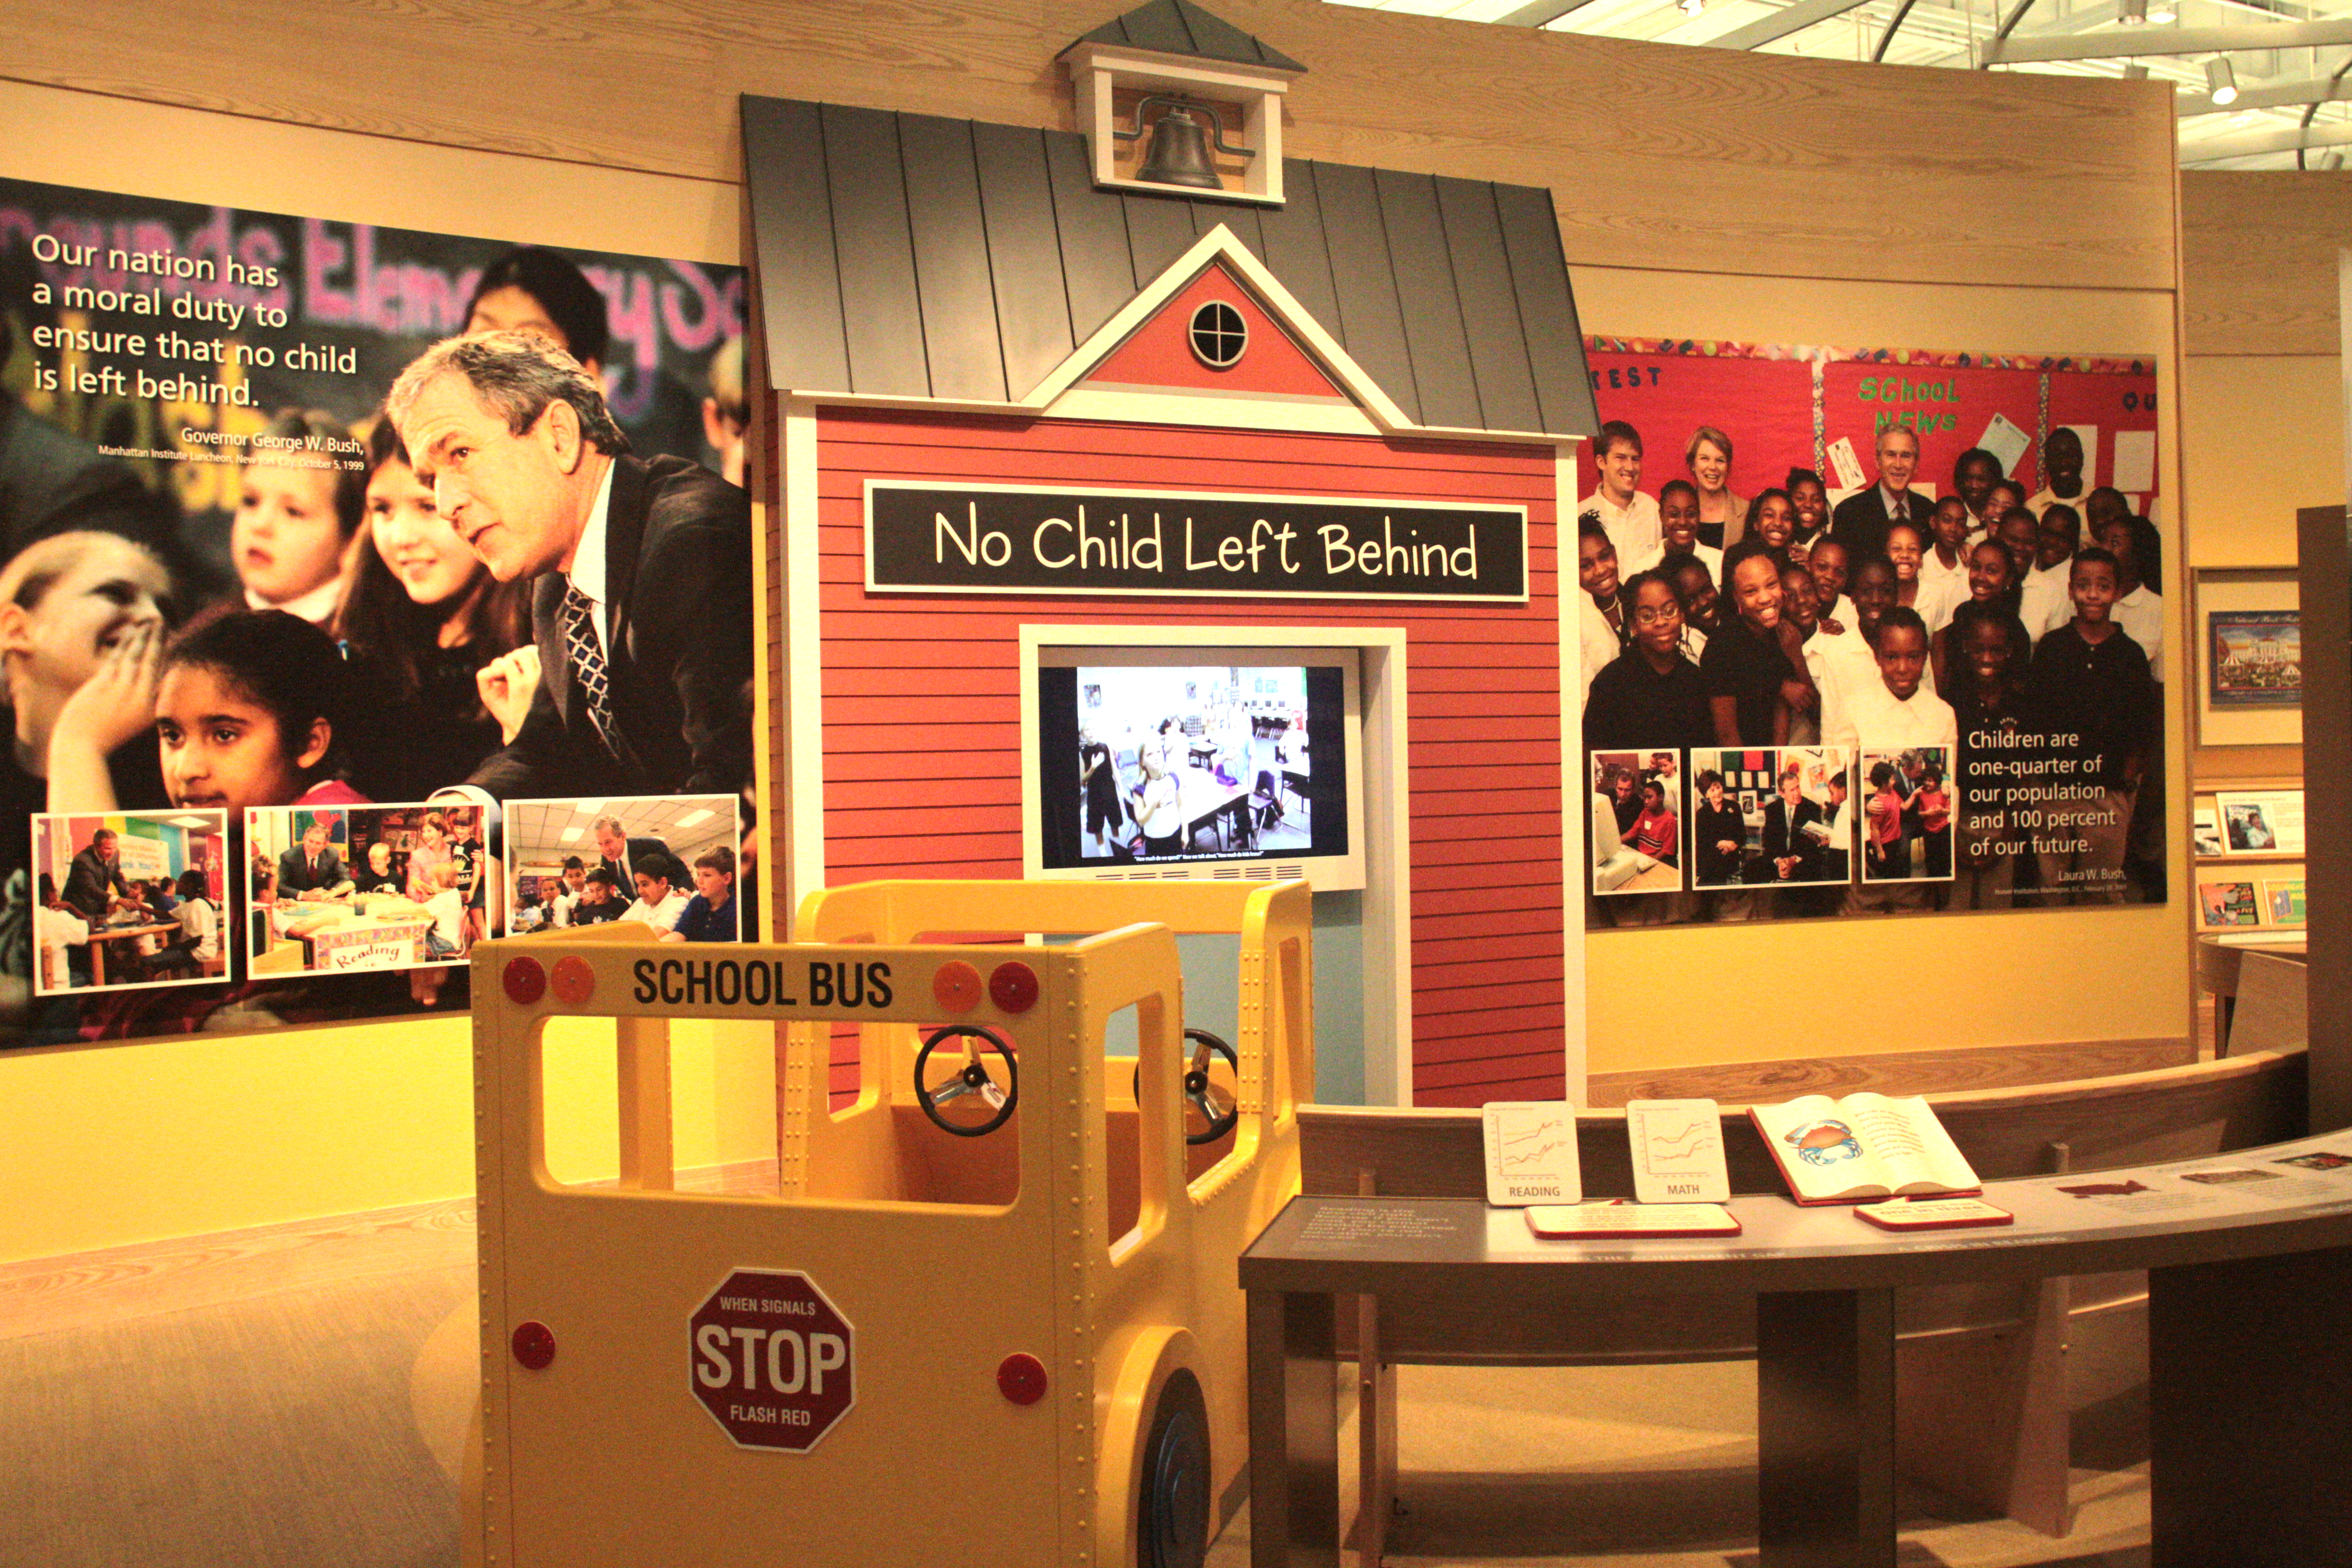 The No Child Left Behind School House at the George W Bush Library and Museum